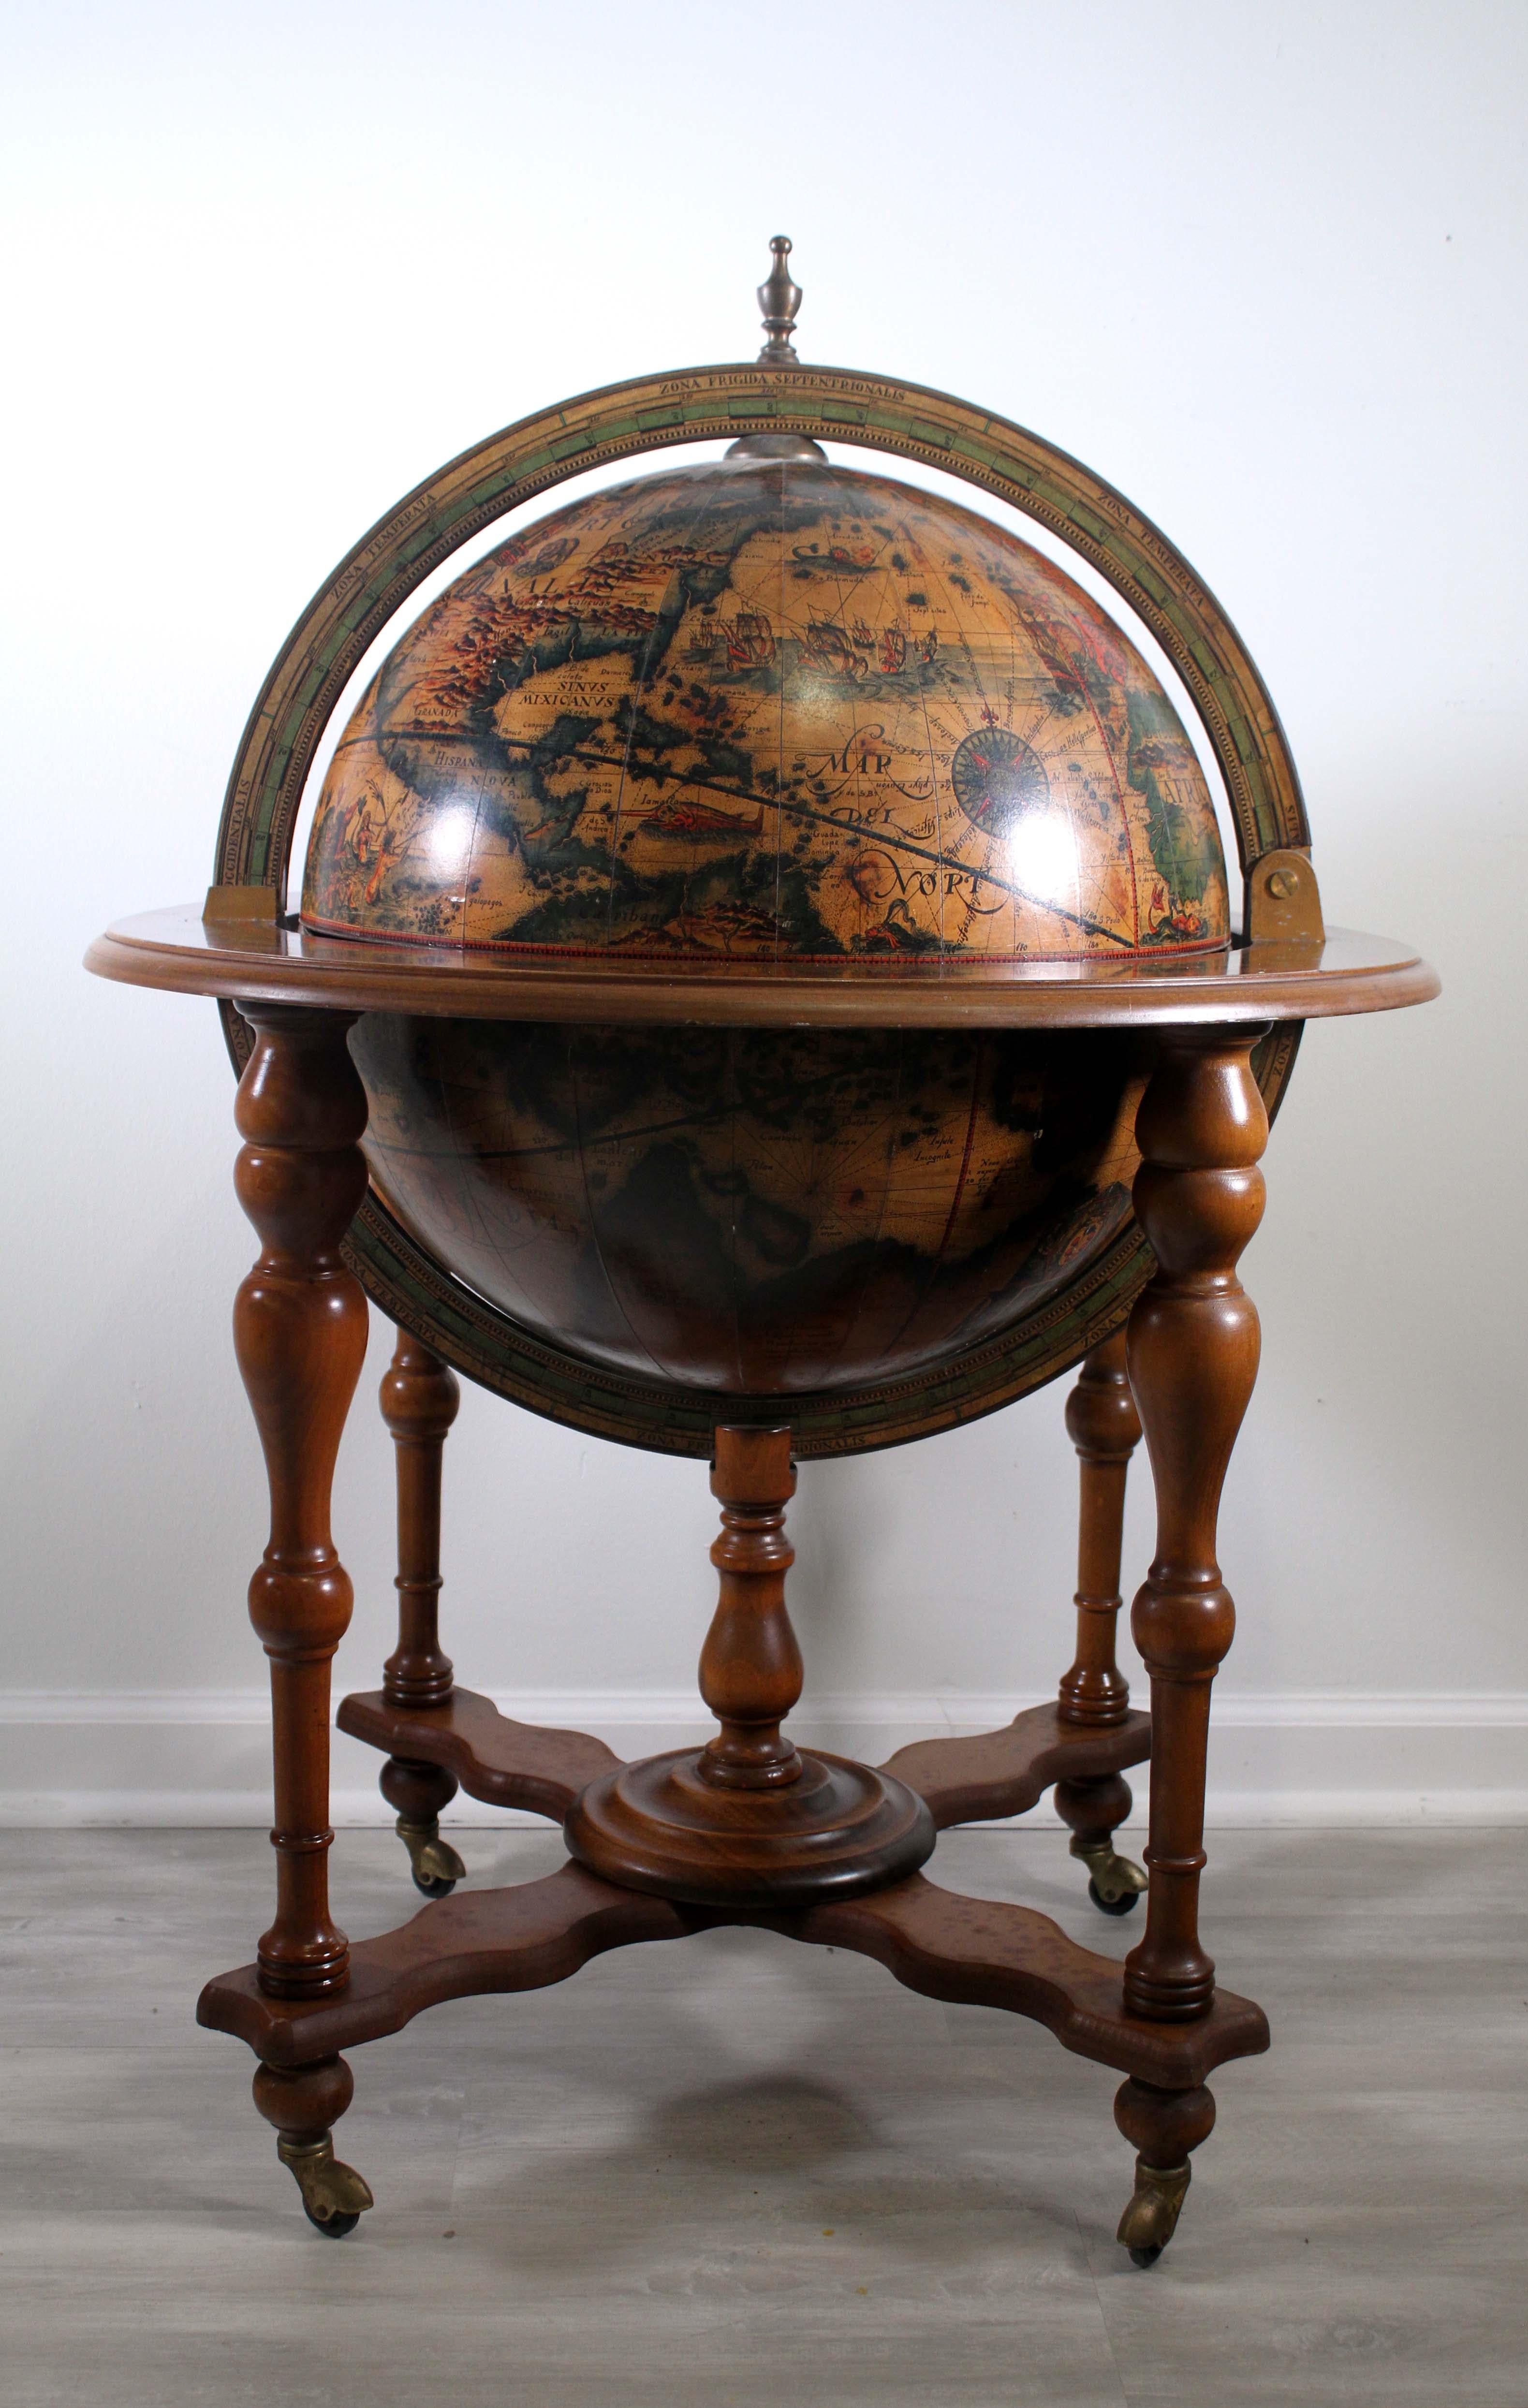 This vintage 1960s Italian dry bar is perfect for adding a touch of classic European style to your home. The world globe design is made of wood, giving it an authentic and timeless look. The wood is finished with a rich walnut stain, bringing out